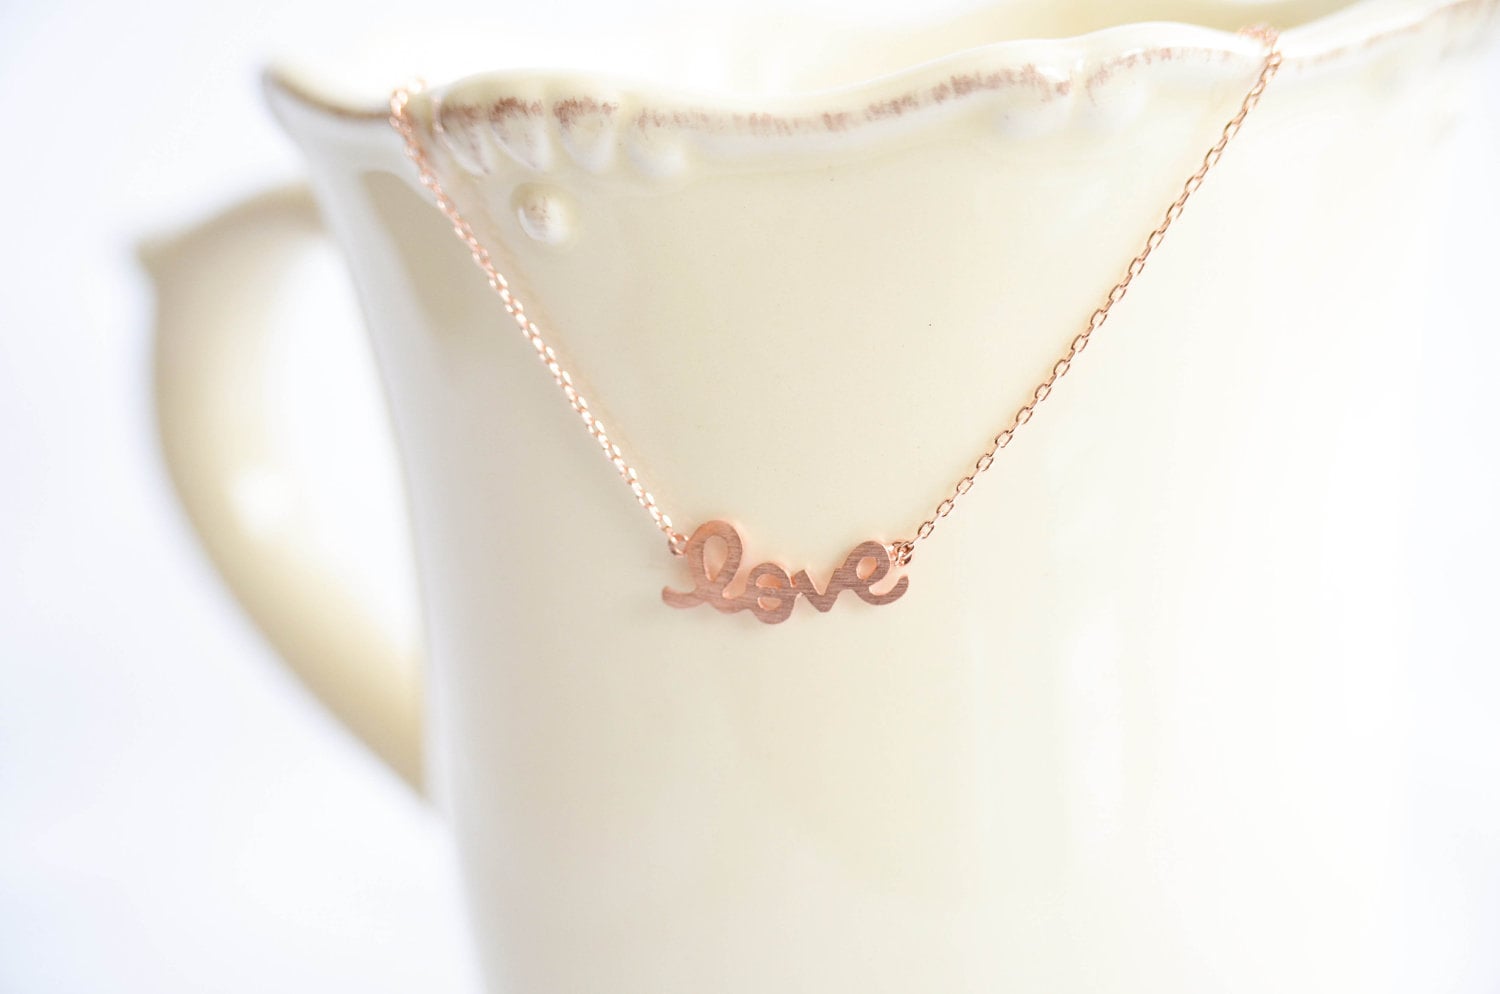 Love Necklaces on Love Necklace In Rose Gold   Pink Gold   Wedding  Bride  Bridal  Love